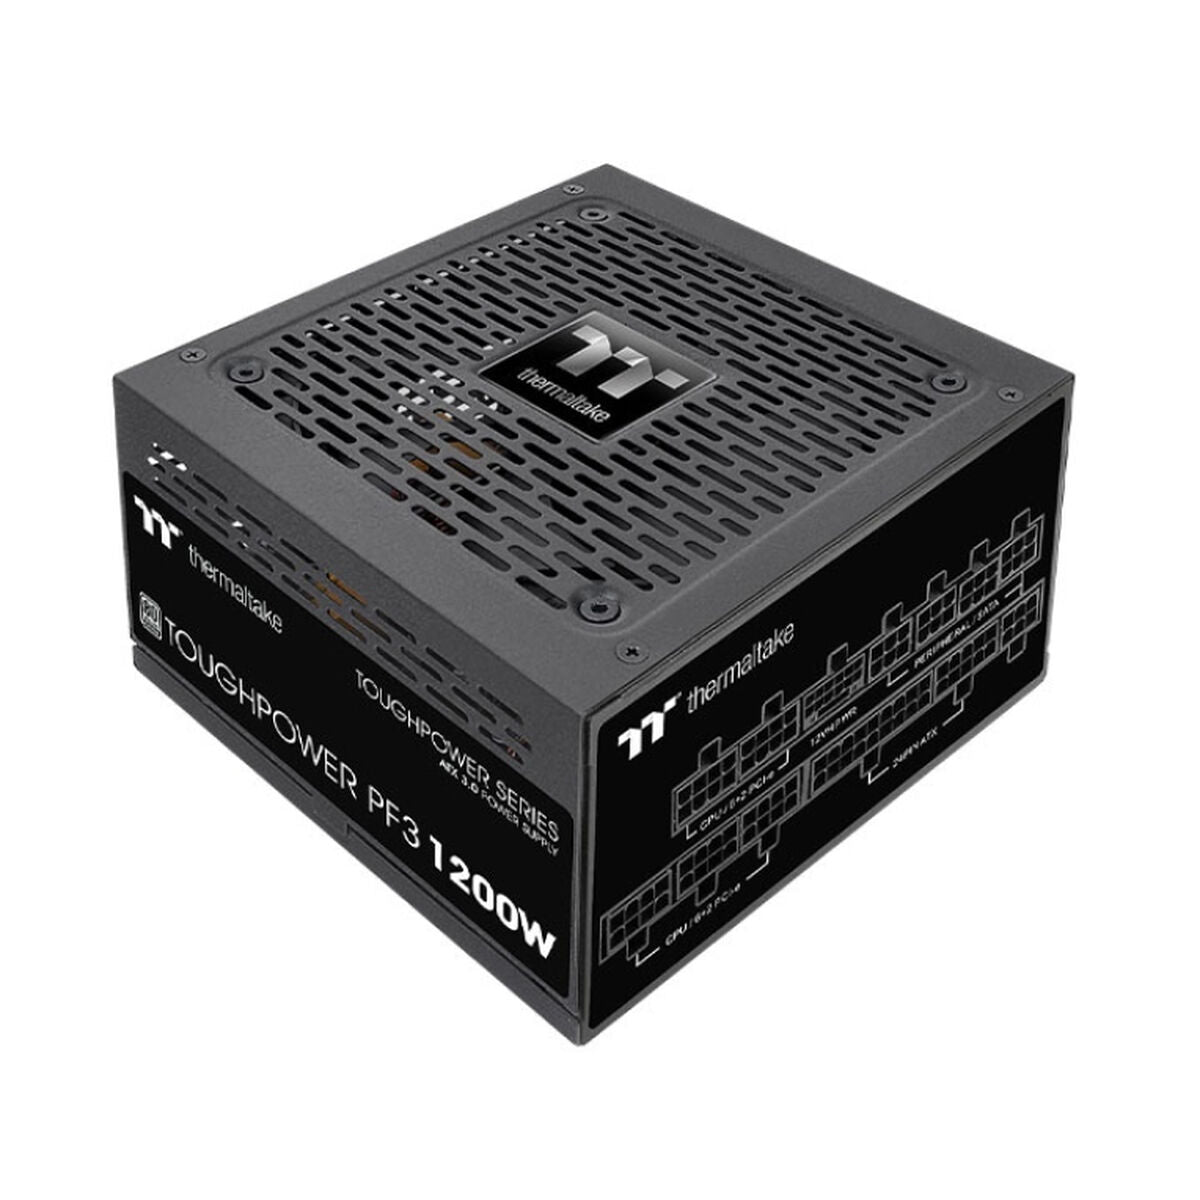 Power supply THERMALTAKE PS-TPD-1200FNFAPE-3 1200 W 80 PLUS Titanium, THERMALTAKE, Computing, Components, power-supply-thermaltake-ps-tpd-1200fnfape-3-1200-w-80-plus-titanium, :1200W, Brand_THERMALTAKE, category-reference-2609, category-reference-2803, category-reference-2816, category-reference-t-19685, category-reference-t-19912, category-reference-t-21360, category-reference-t-25656, computers / components, Condition_NEW, ferretería, Price_200 - 300, Teleworking, RiotNook